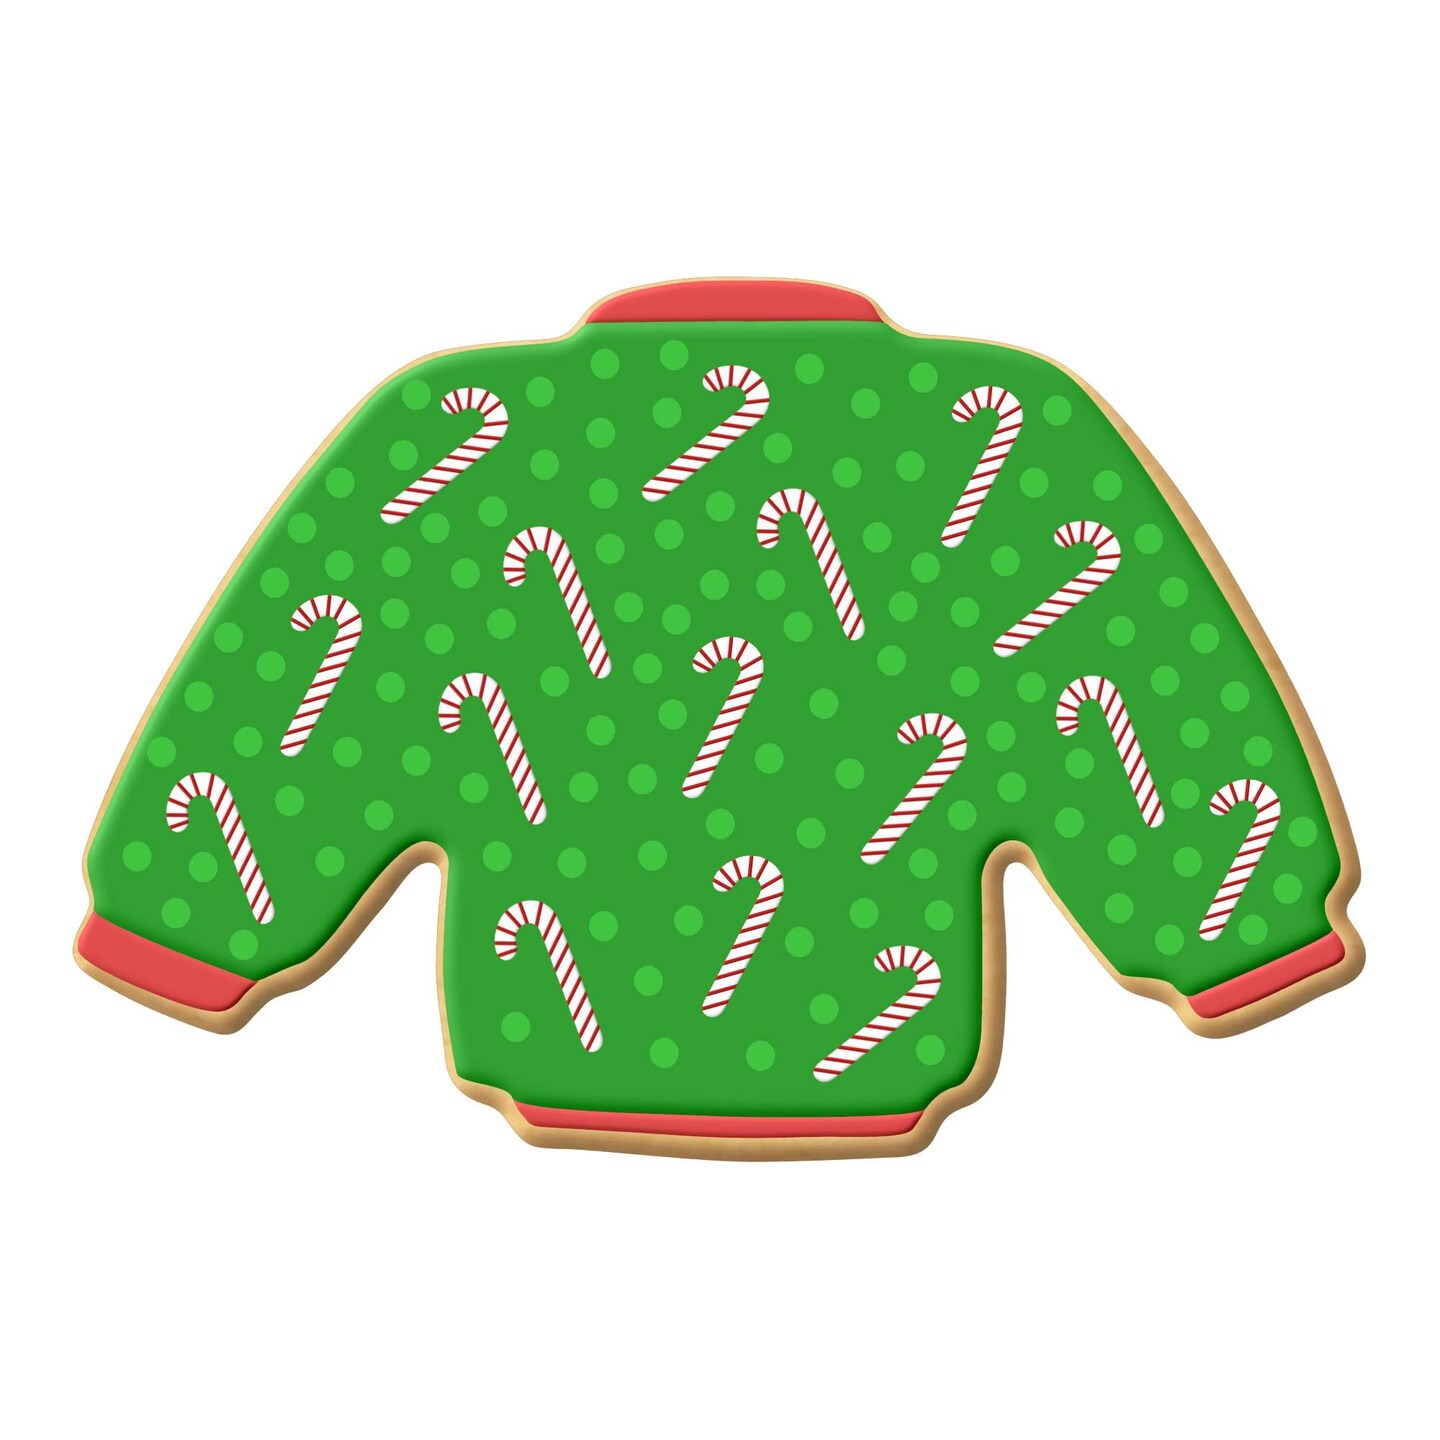 Ugly Sweater Cookie Cutter – The Flour Box